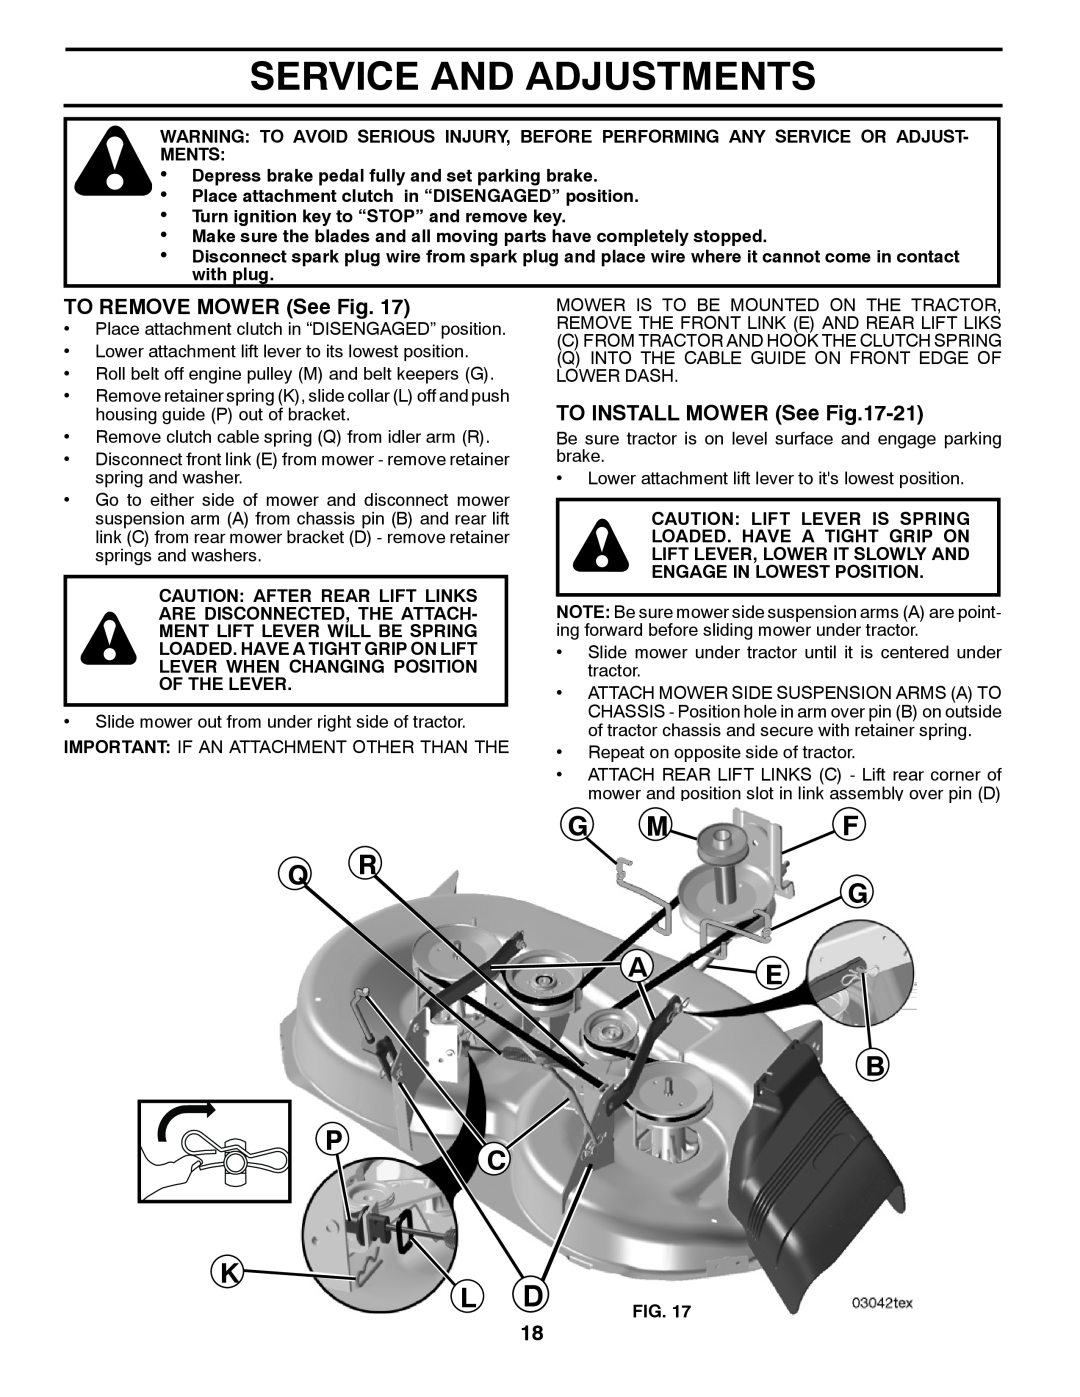 Poulan 412412 manual Service And Adjustments, G M F Q Rg, A E B C, TO REMOVE MOWER See Fig, TO INSTALL MOWER See -21 